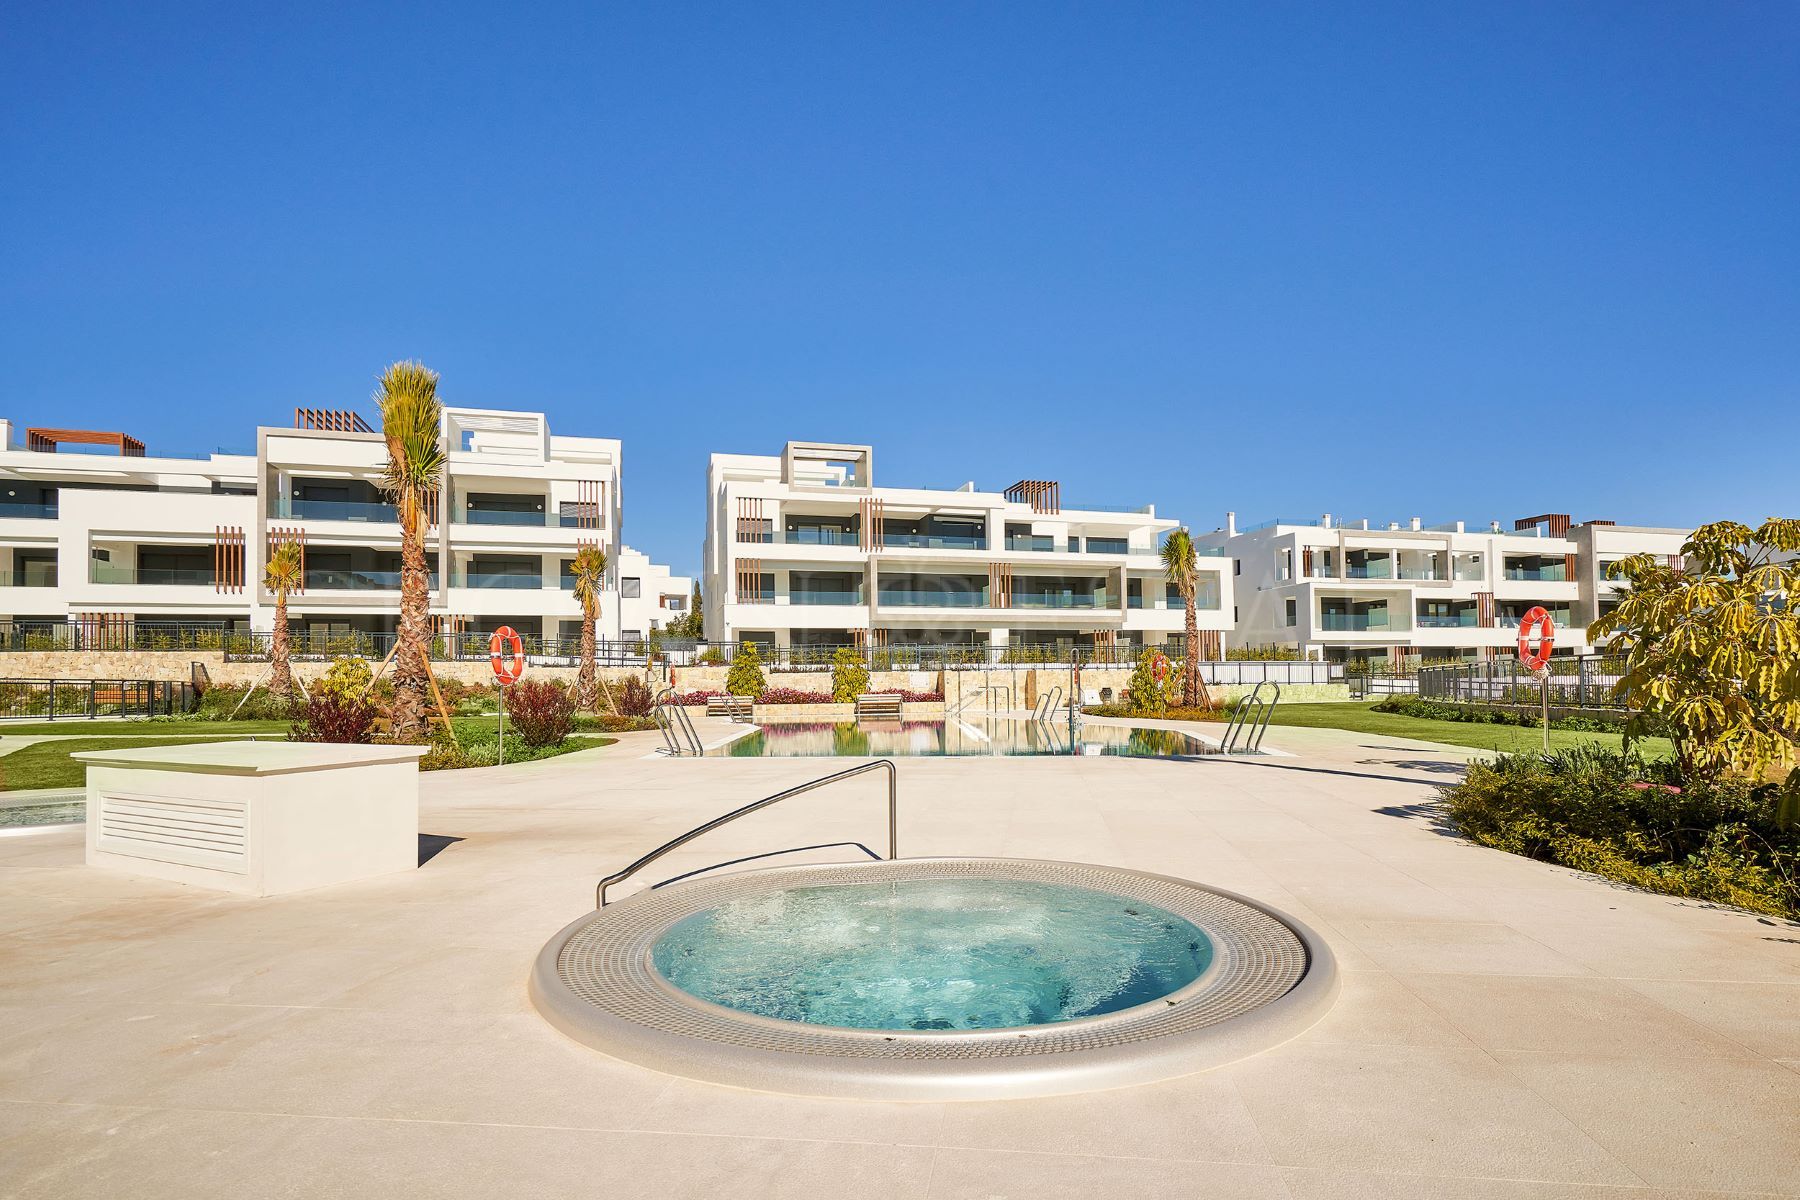 New key ready apartments with sea views, in walking distance to the beach and all amenities